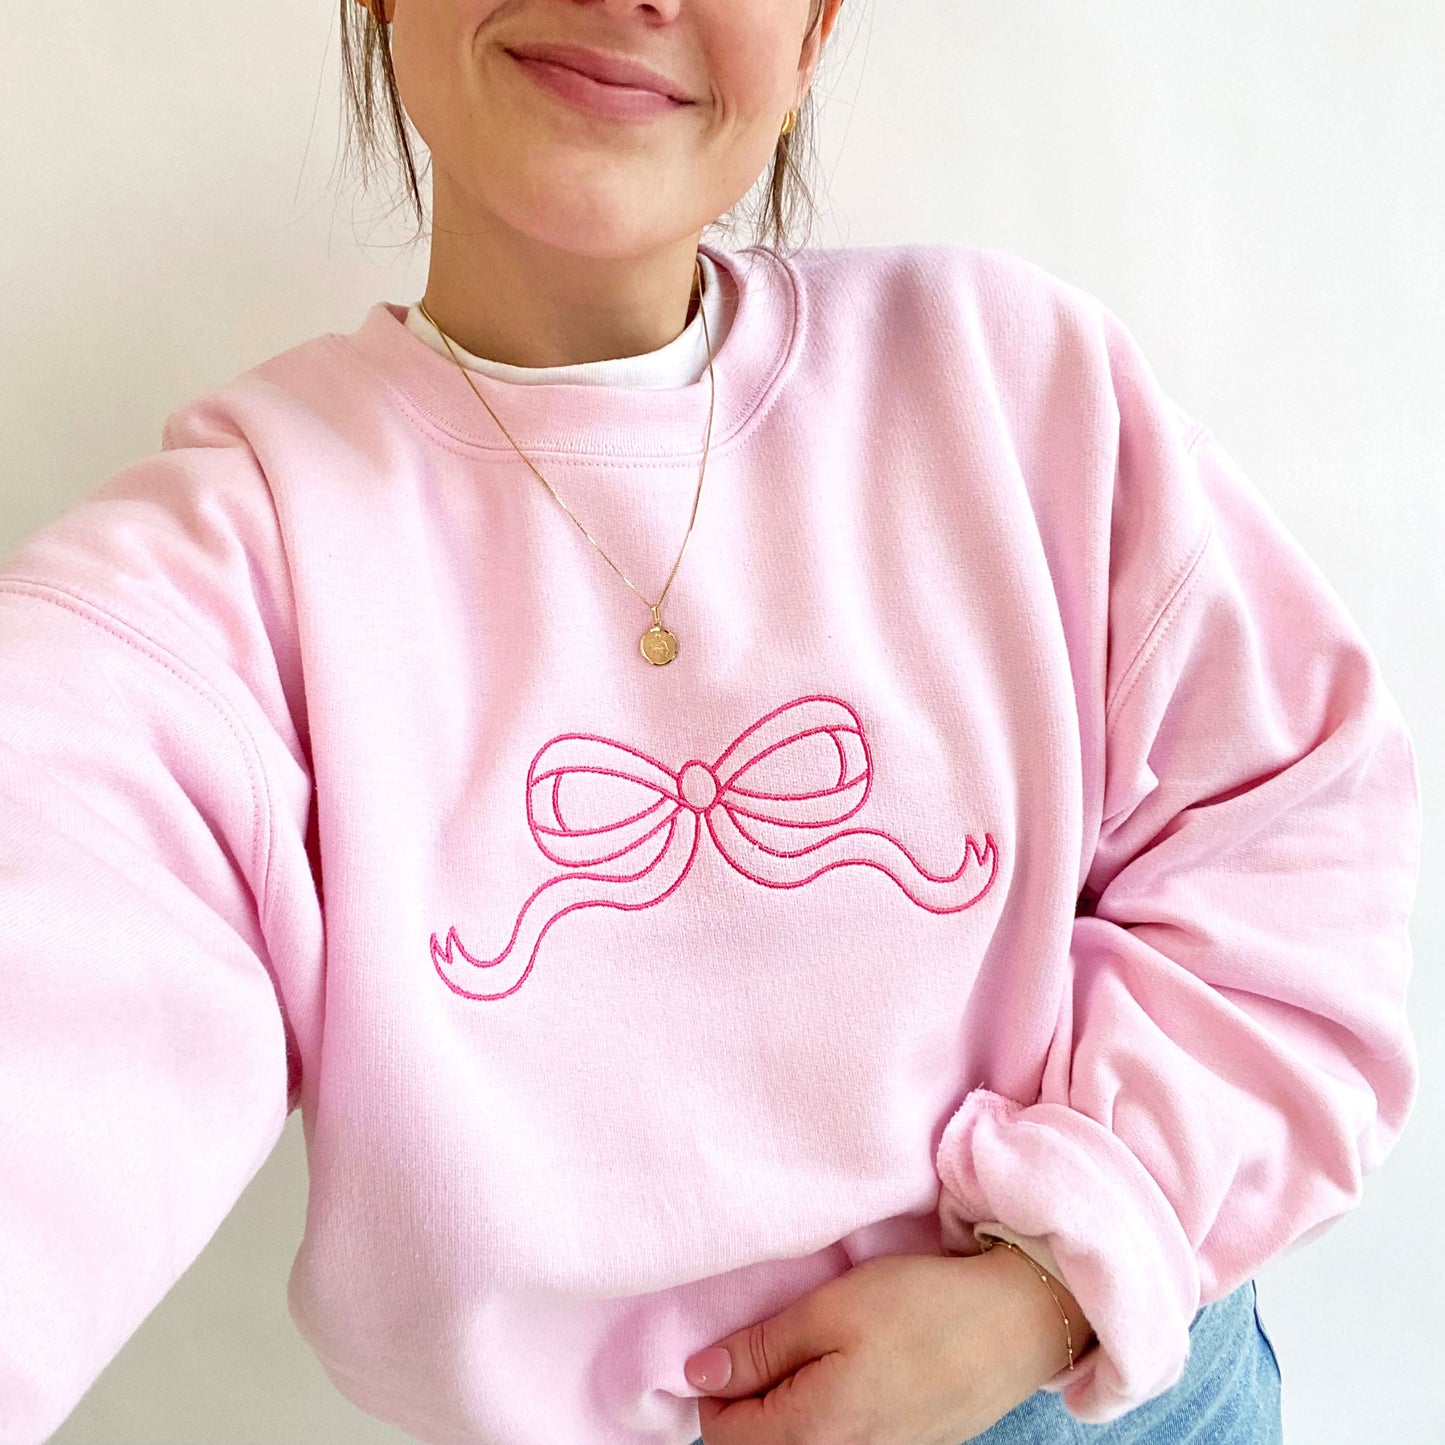 Woman wearing a light pink crewneck sweatshirt with large outline bow embroidered across the chest in pink thread